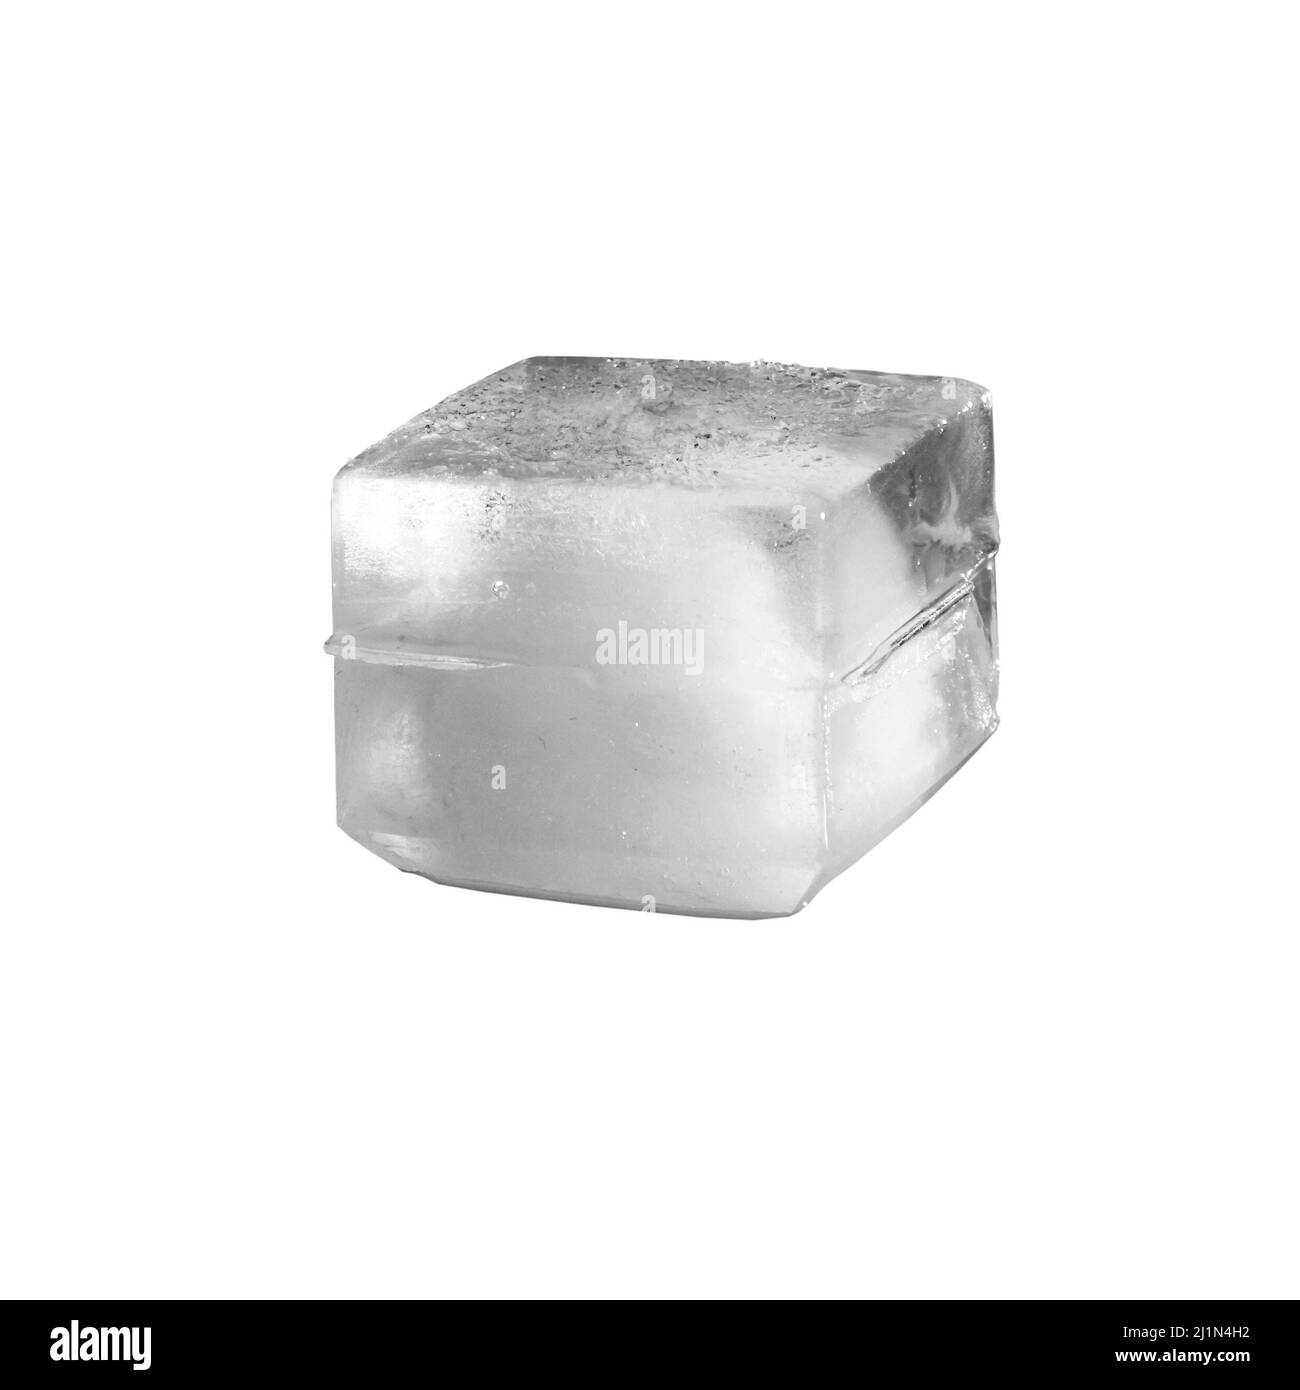 https://c8.alamy.com/comp/2J1N4H2/square-ice-cube-isolated-on-white-background-2J1N4H2.jpg